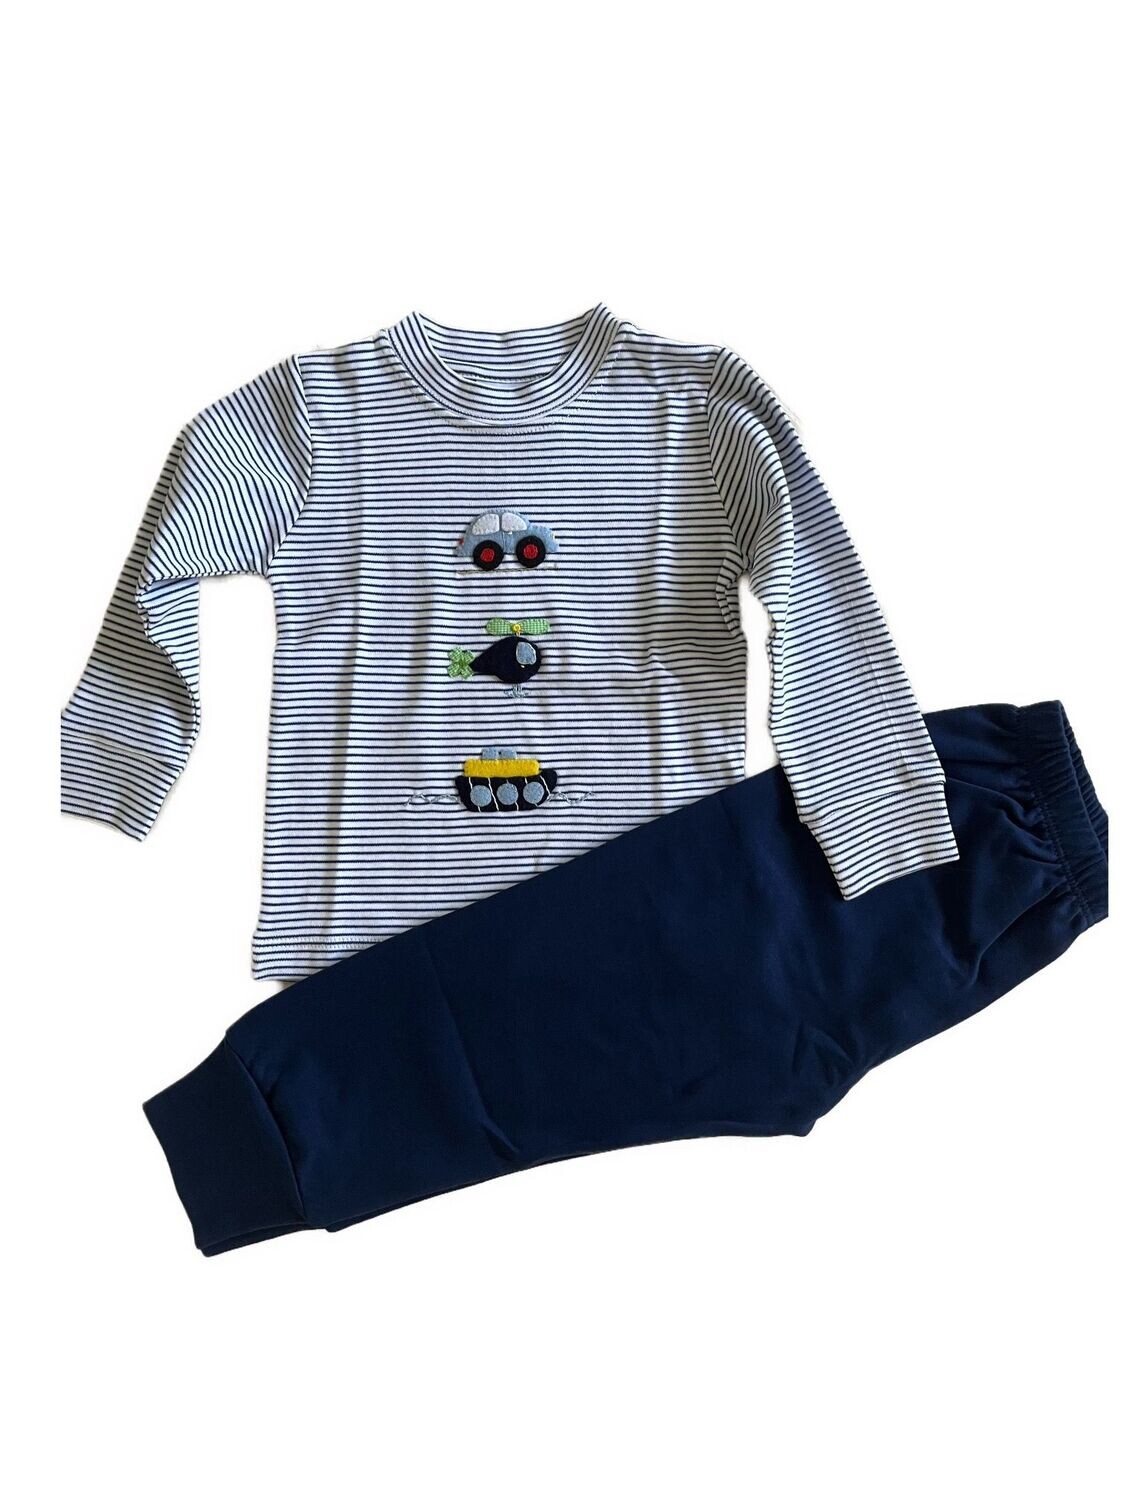 Beep, Whirl, Toot Pant Set, Size: 18m